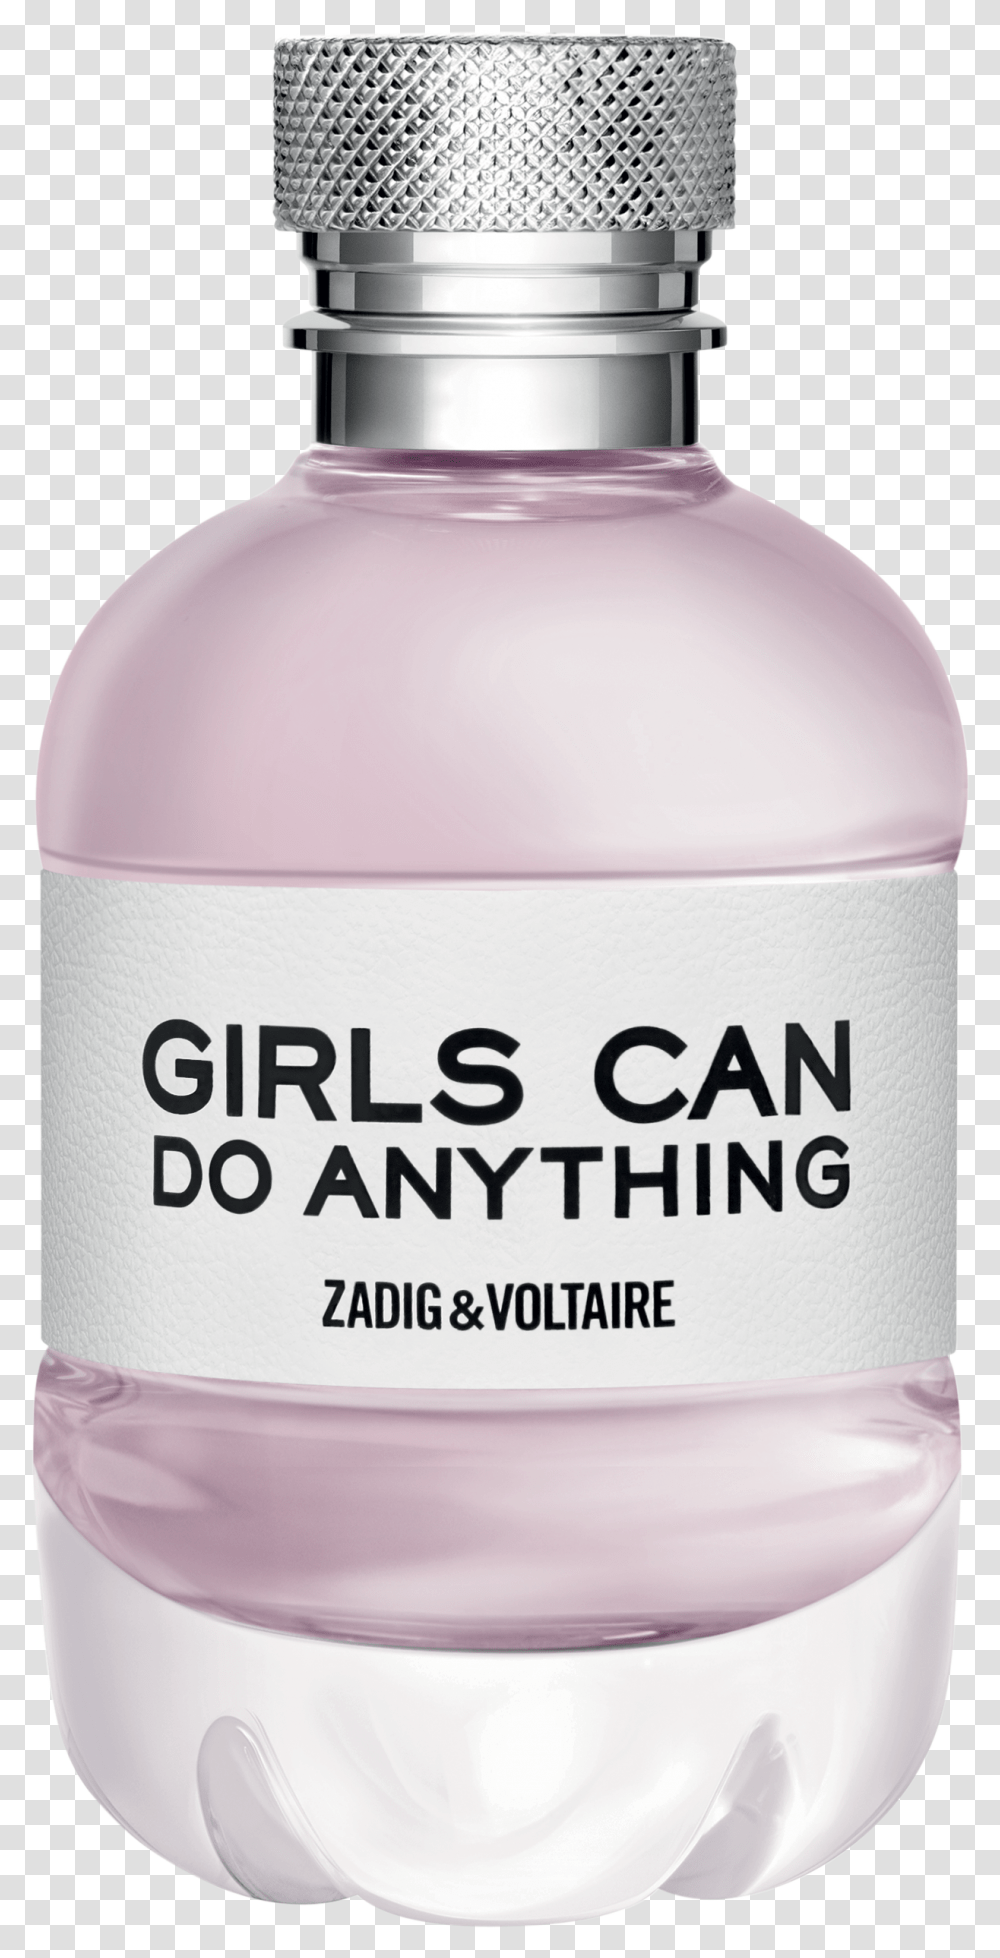 Girls Can Do Anything Perfume, Milk, Beverage, Drink, Bottle Transparent Png